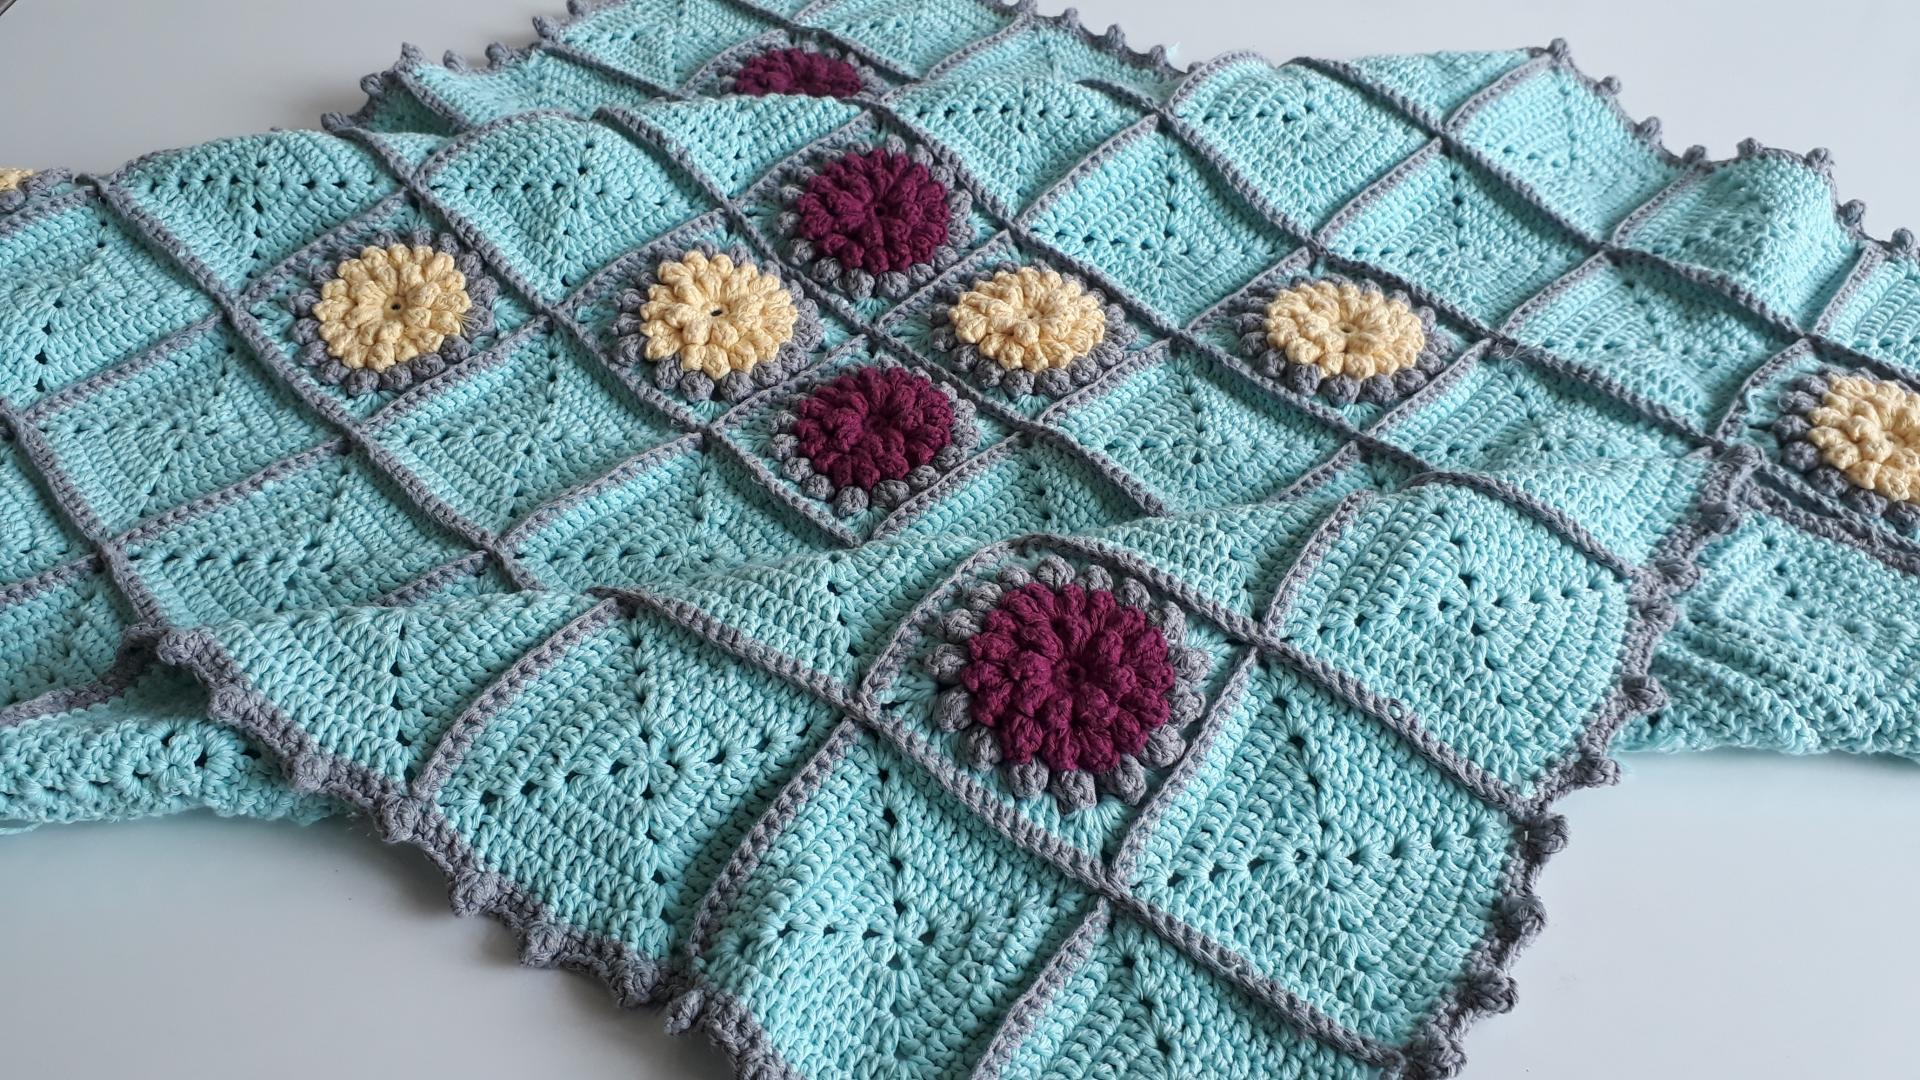 Knitting a Cozy Blanket, A Guide for Beginners